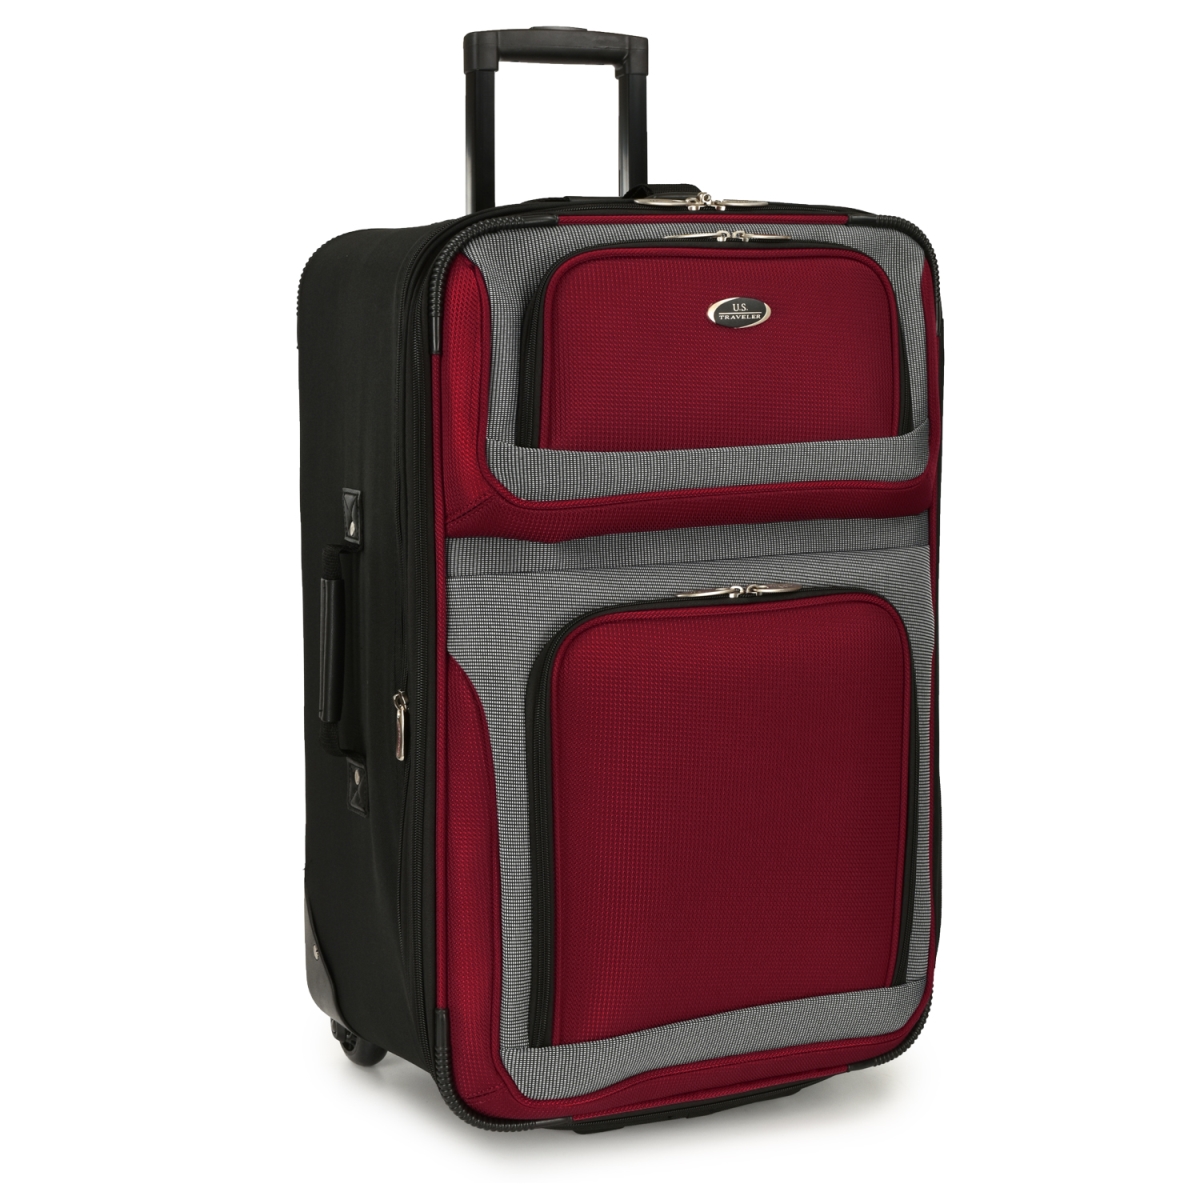 Us6300r24 New Yorker 25 In. Rolling Luggage, Red